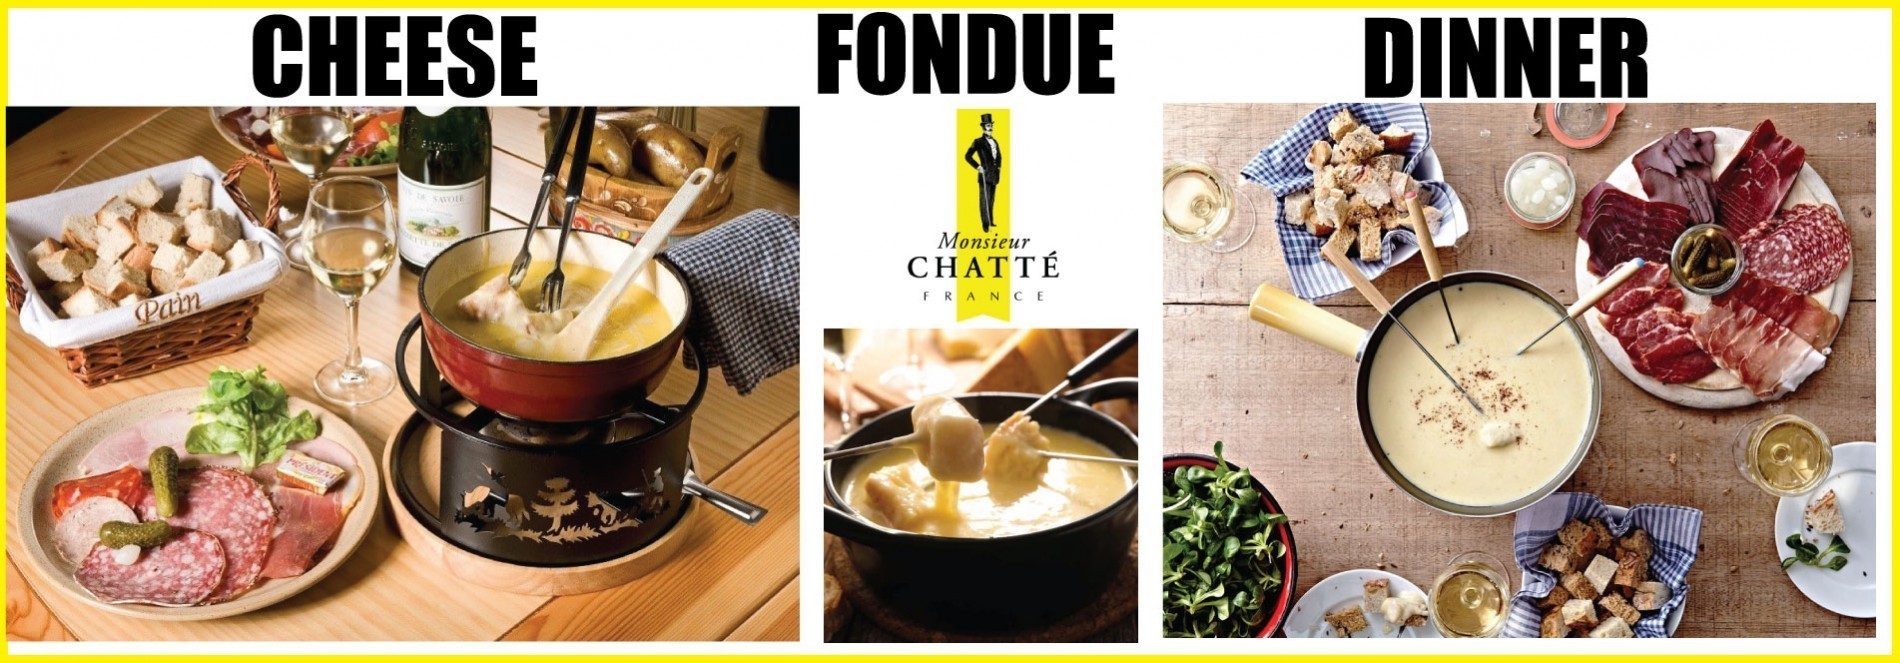 FONDUE CHEESE DINNER for 2 persons